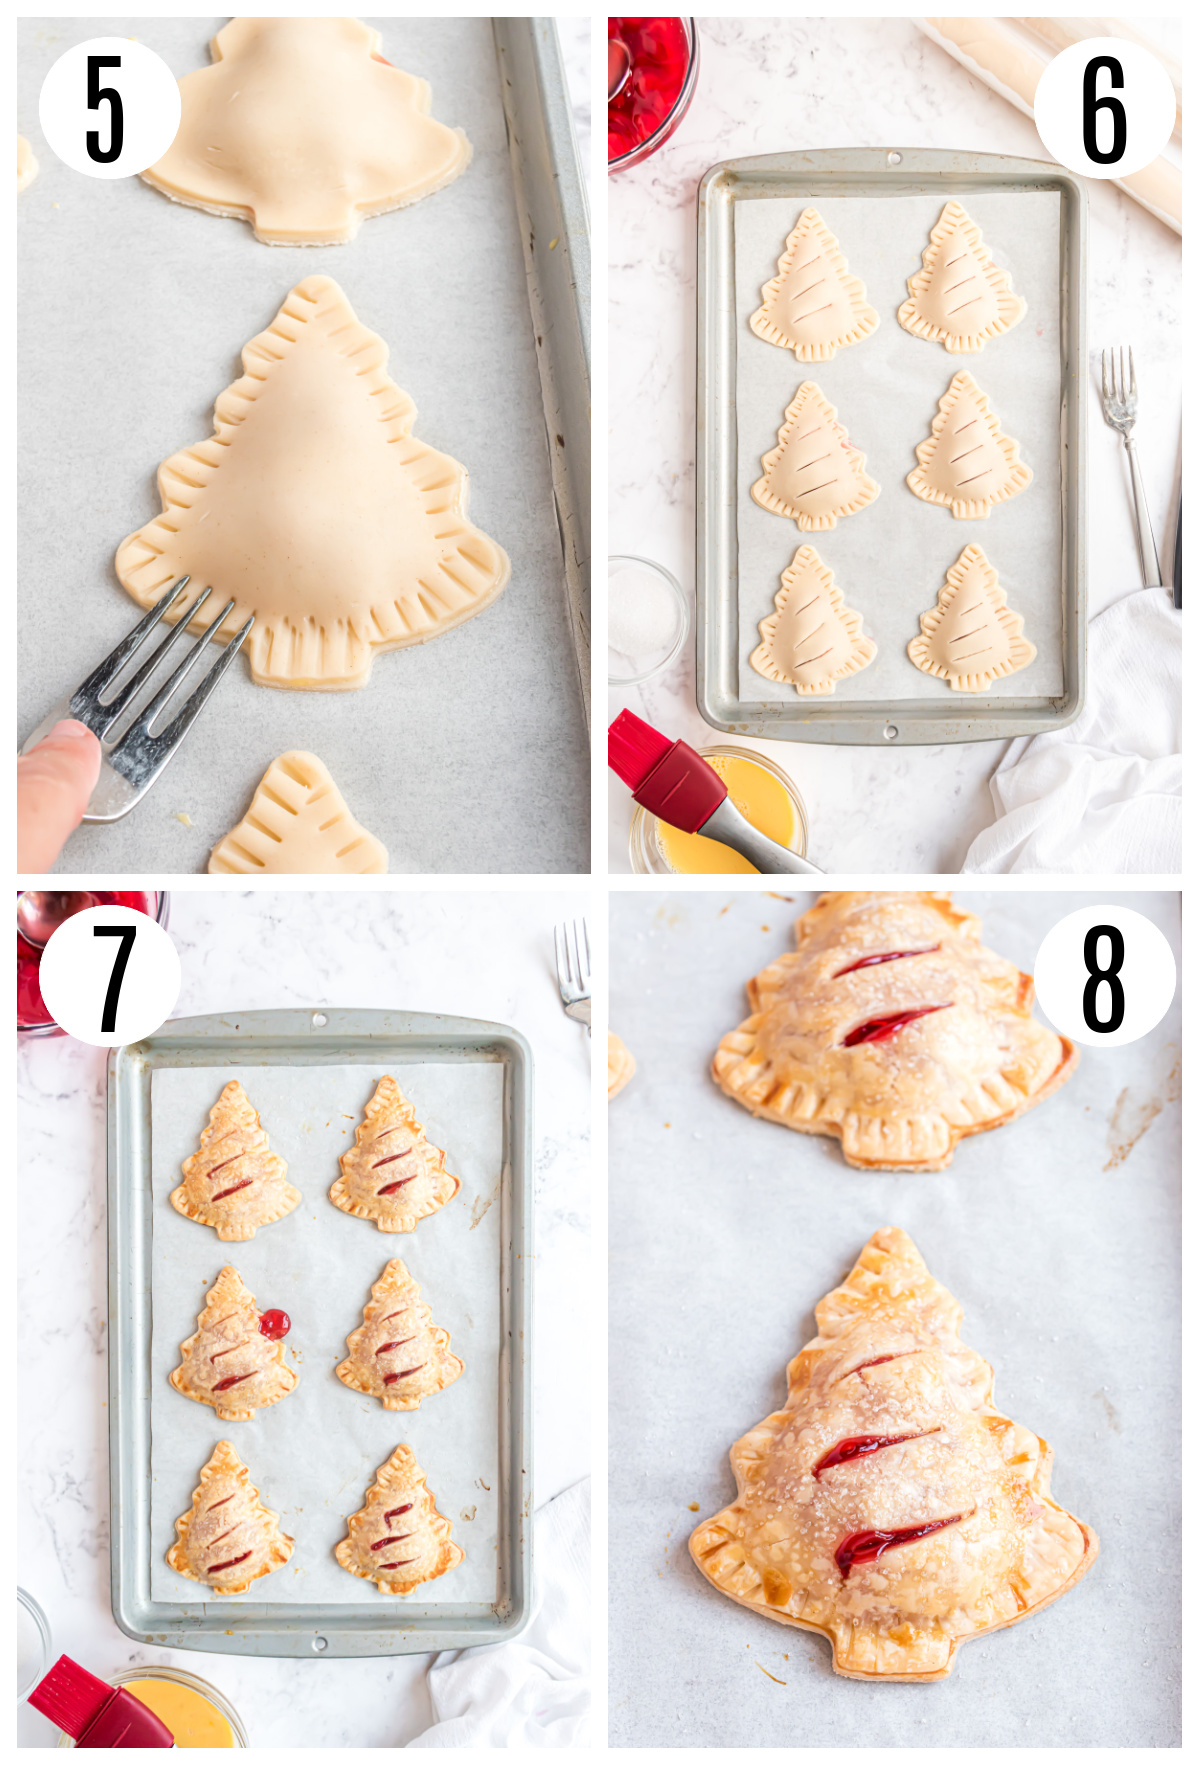 The next steps to making the mini cherry hand pies include pressing the crust together with the tines of a fork, cutting slits in the top layer to allow steam to escape, and baking them.